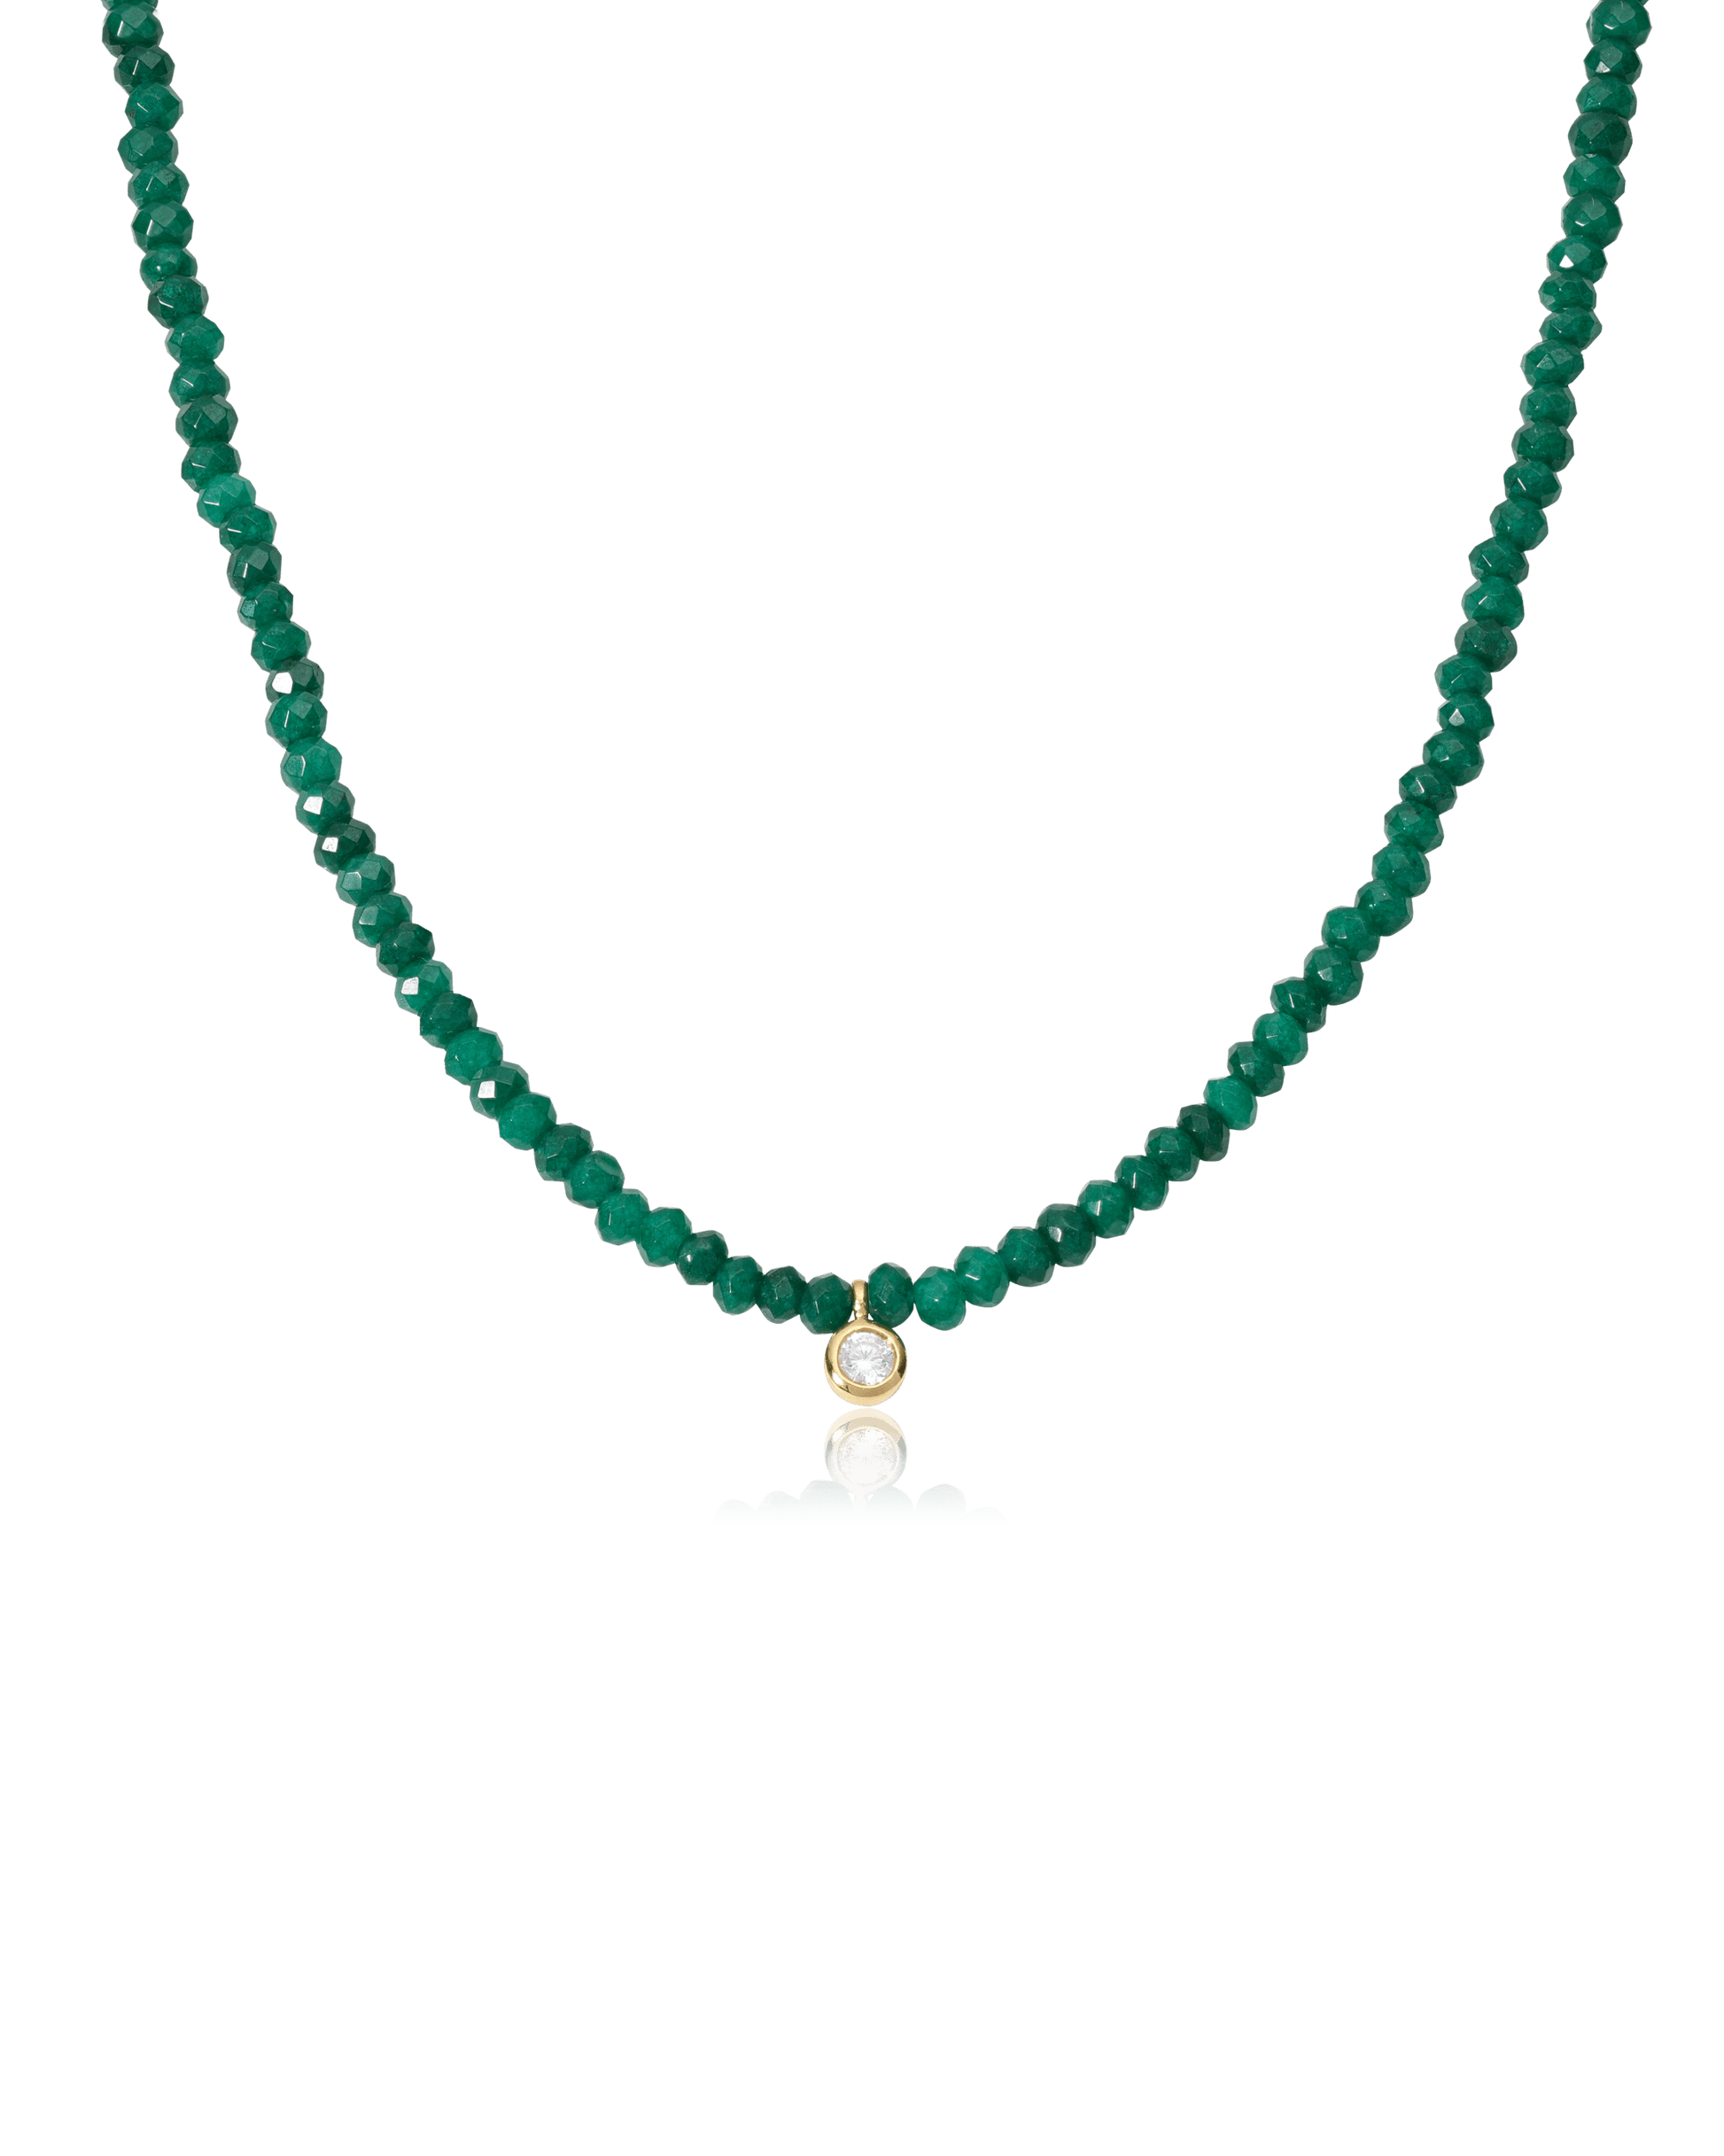 Green Jade and Diamond Necklace - 14K Yellow Gold Necklaces magal-dev Green Jade Gemstones Small: 0.03ct 16"